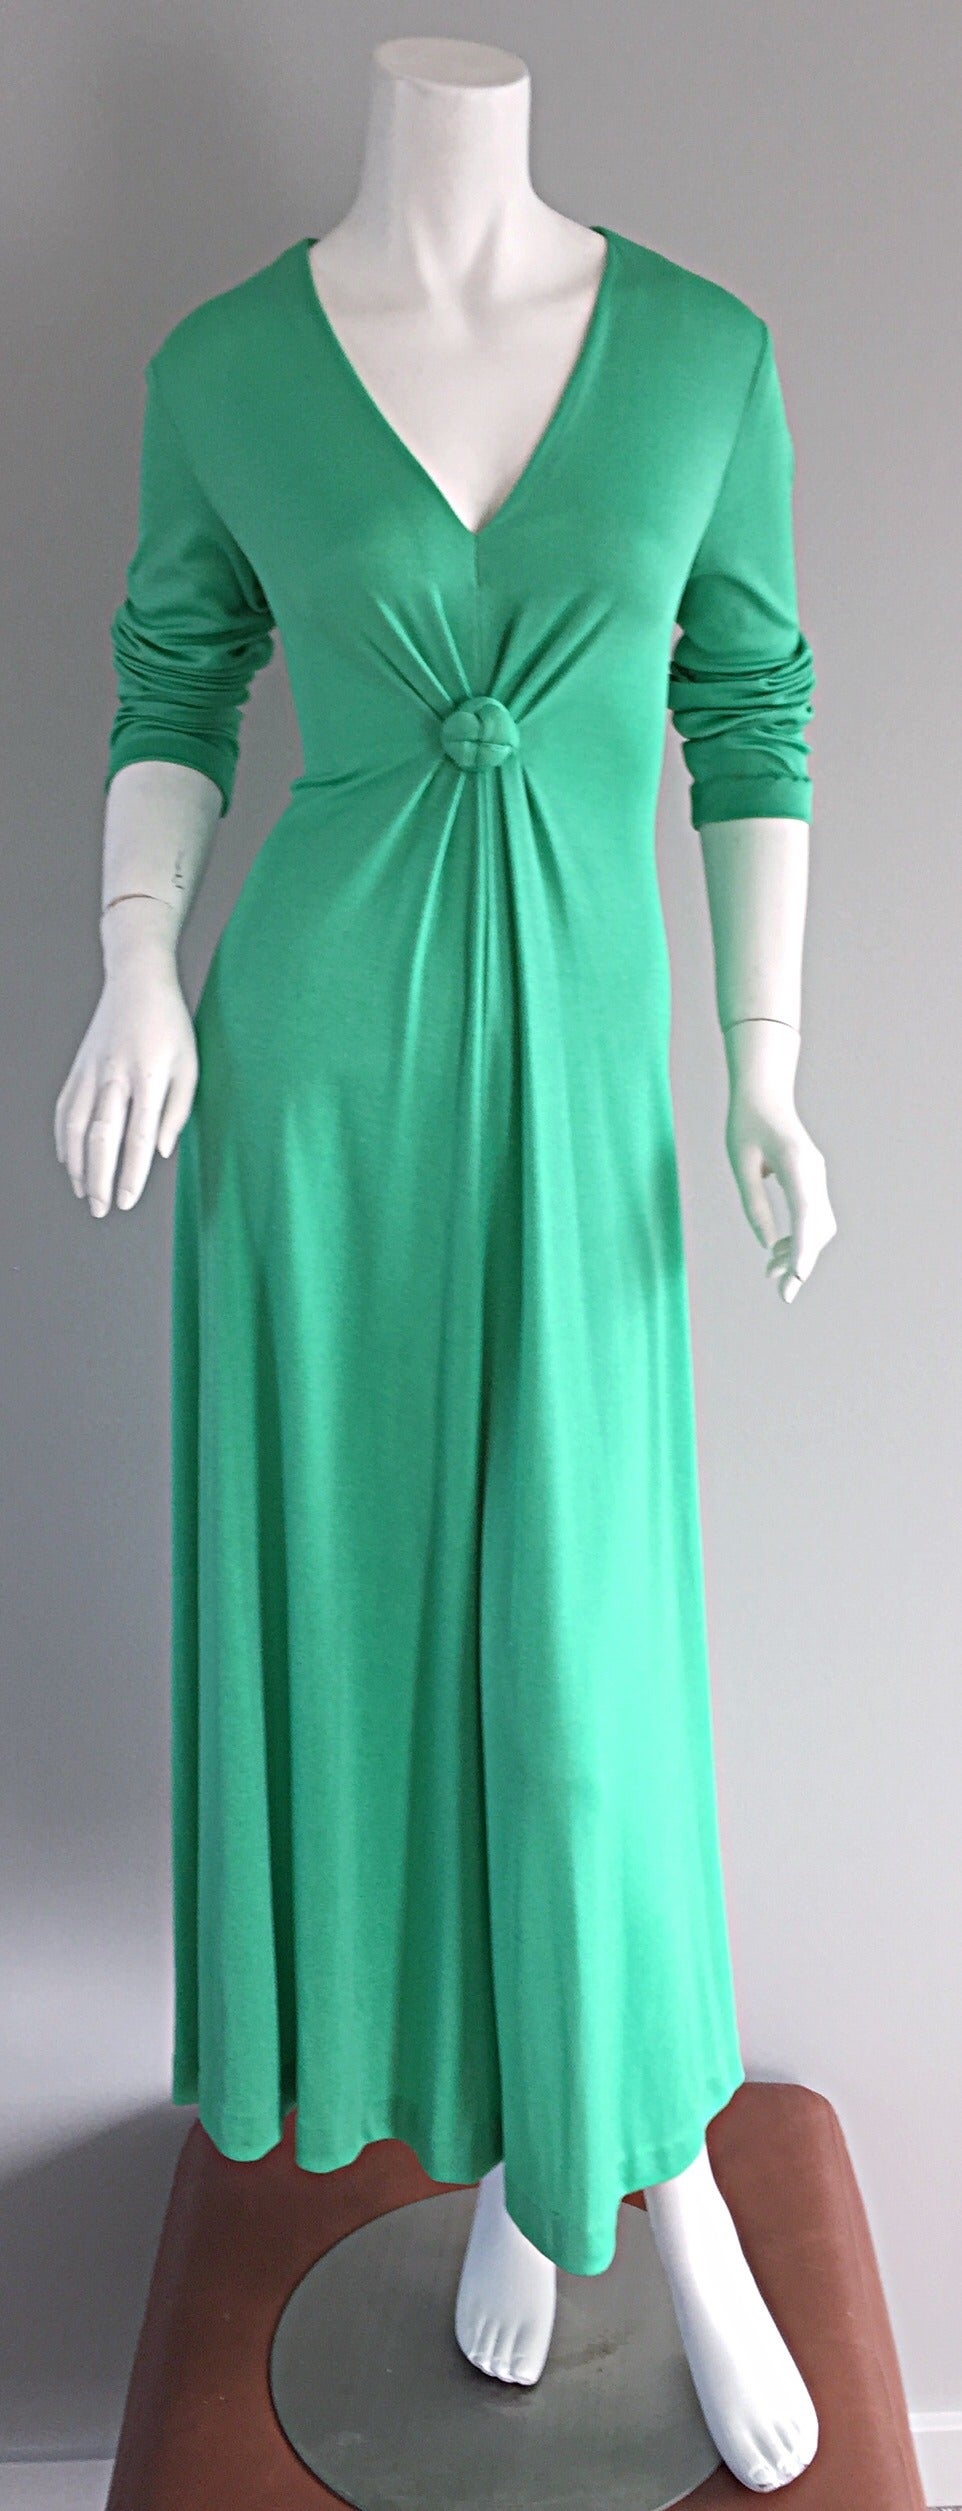 Blue Rare Early 1970s Vintage Frederick's of Hollywood Kelly Green Jersey Maxi Dress